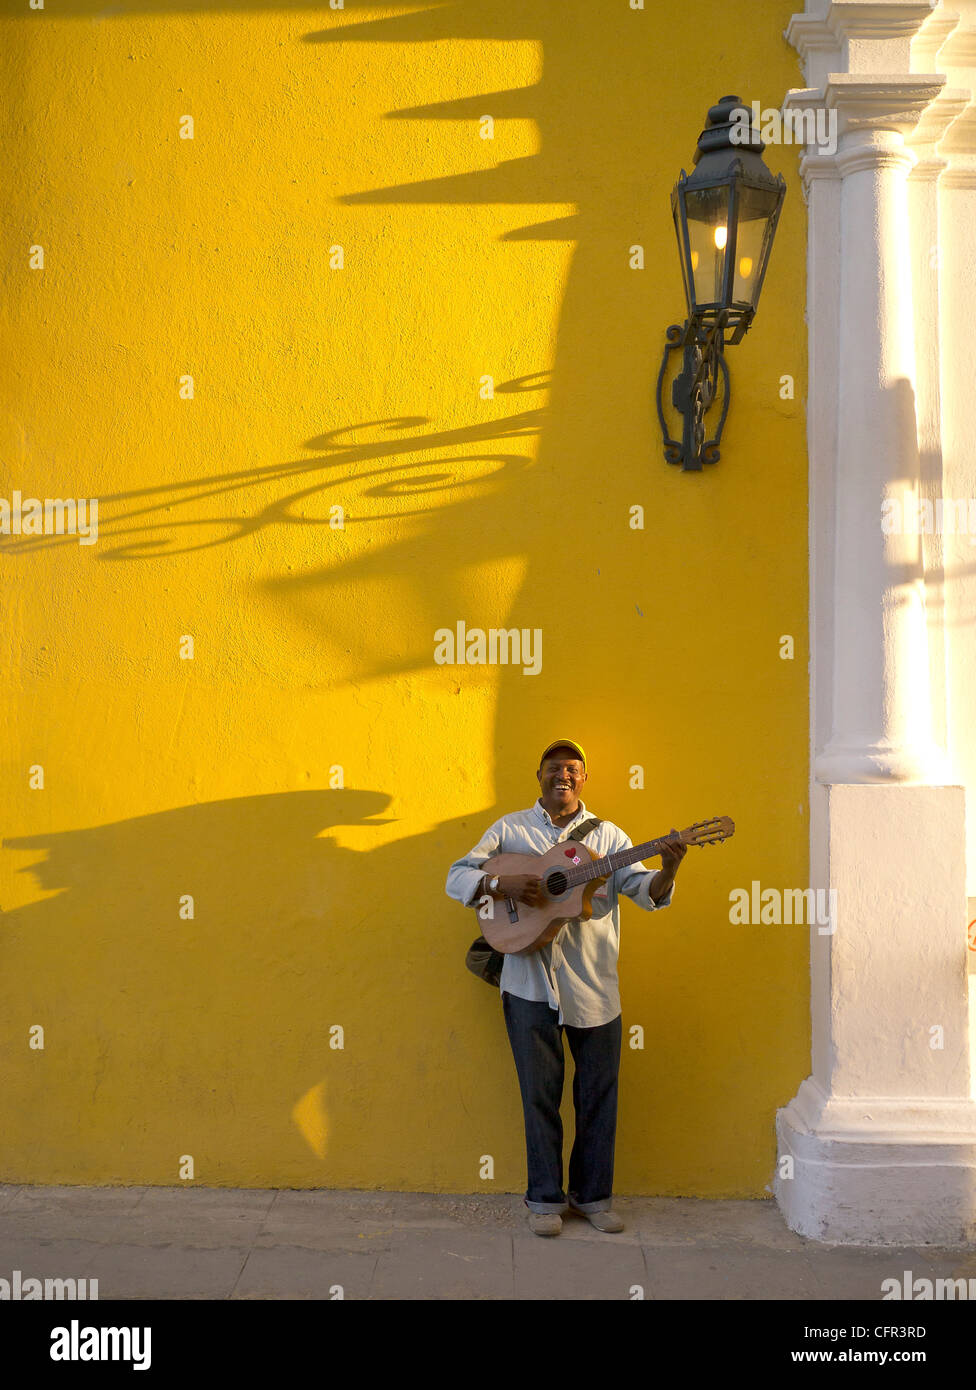 A male Hispanic street musician plays his guitar against a yellow wall late afternoon with strong shadows in Havana, Cuba. Stock Photo